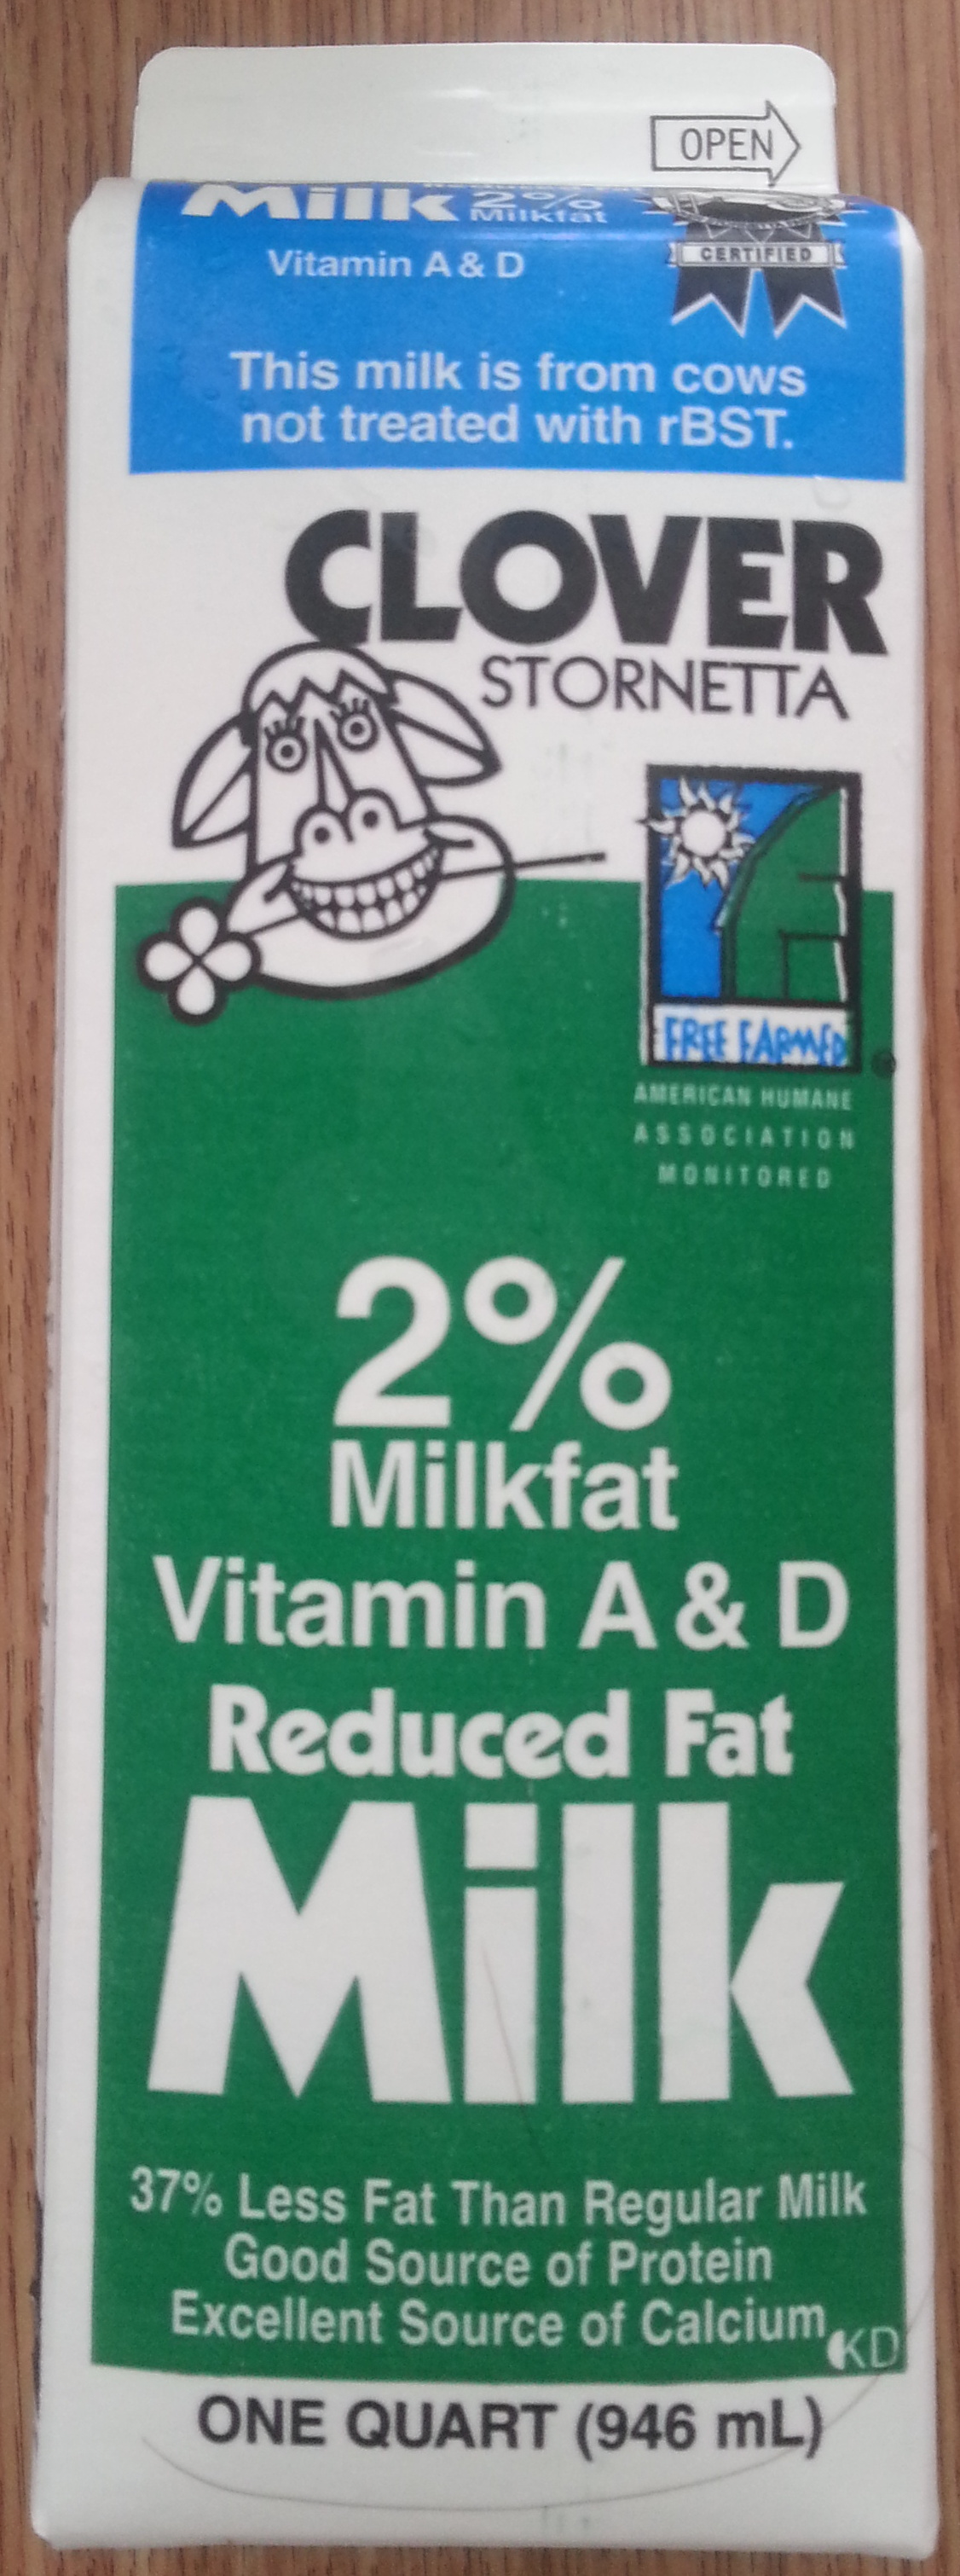 Reduced fat milk - Product